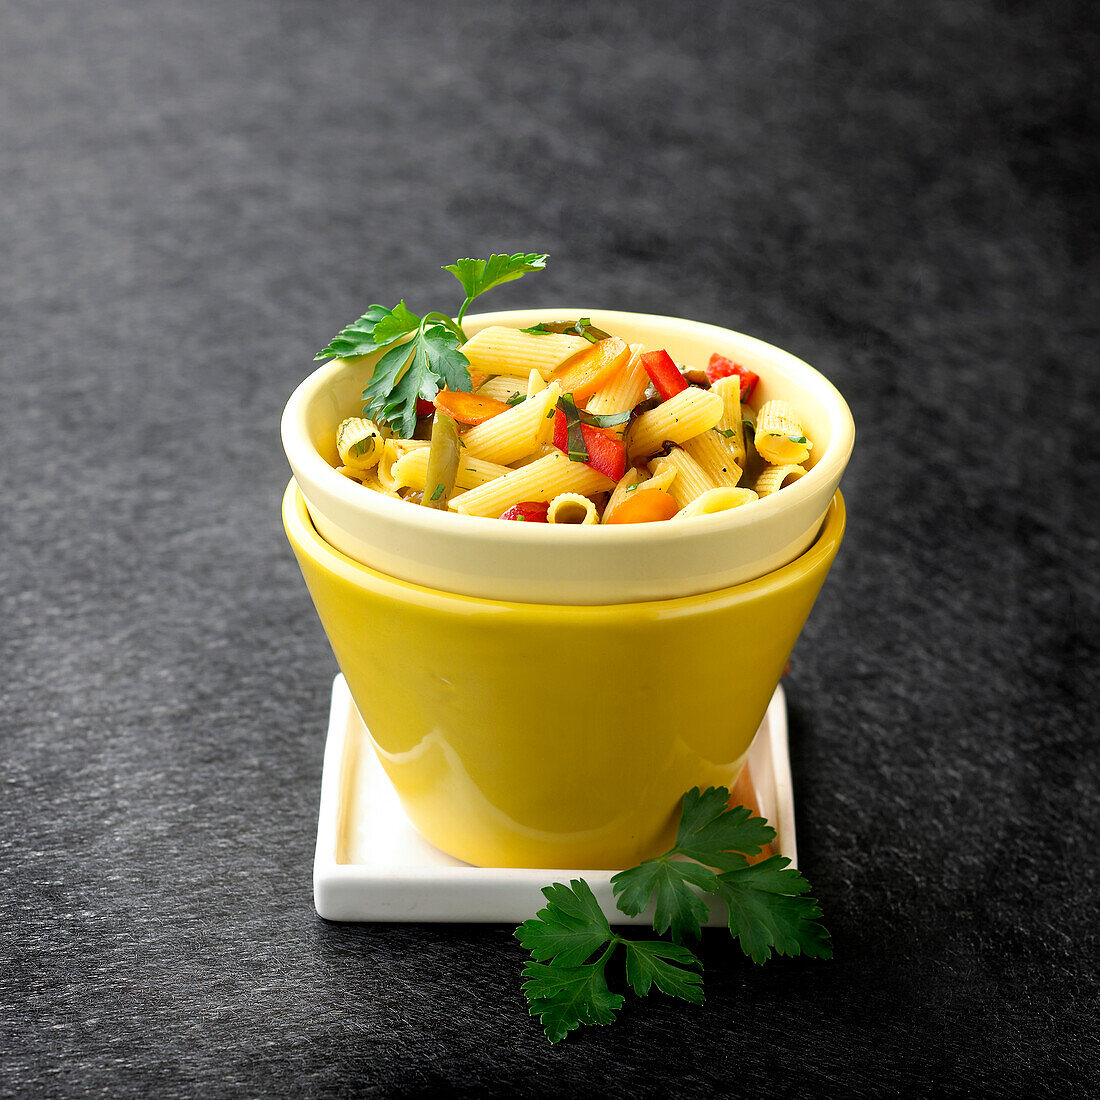 Penne and vegetable salad